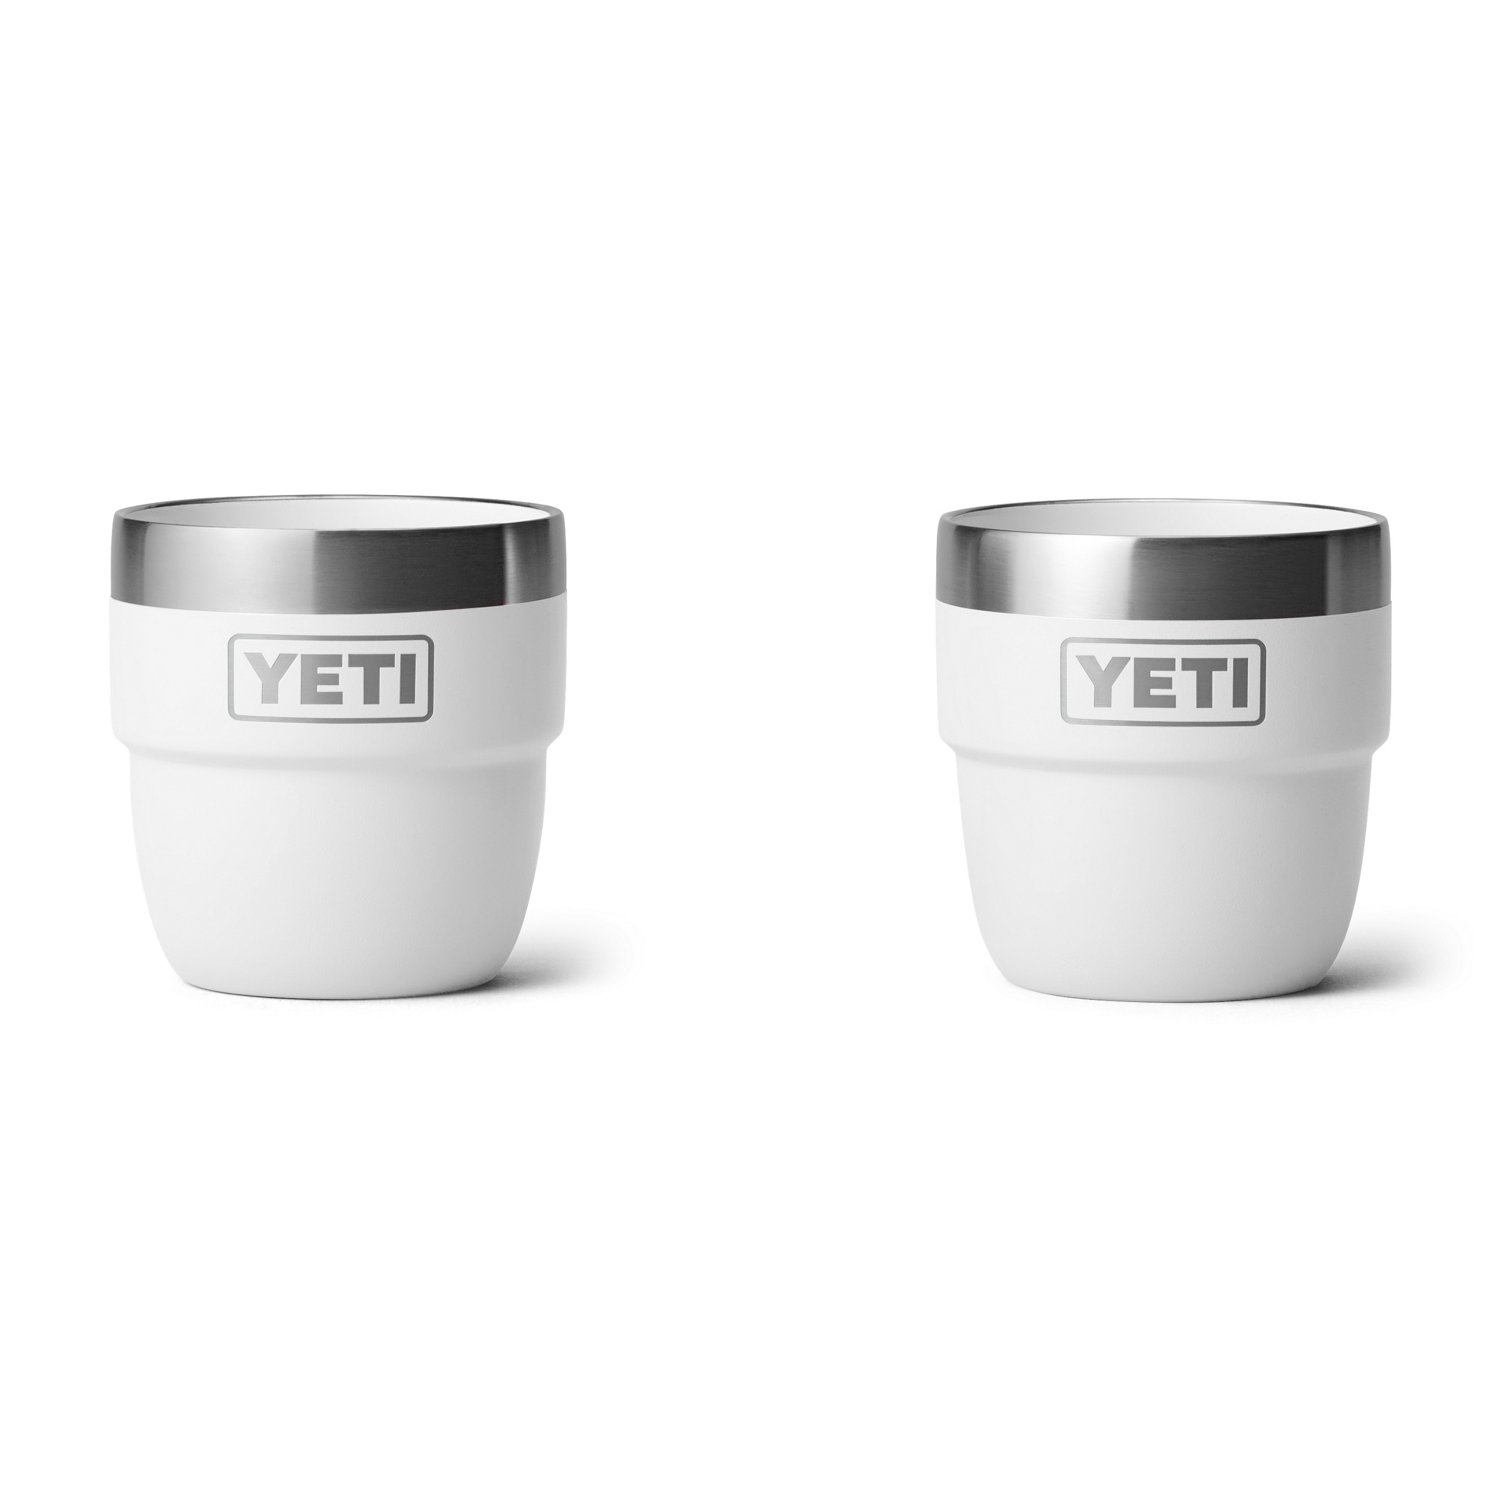 https://academy.scene7.com/is/image/academy//drinkware/yeti-rambler-4-oz-espresso-cups-2-pack-21071501858-white/6ecaad5ad70f4c6090ab8ef15eec3668?$pdp-gallery-ng$